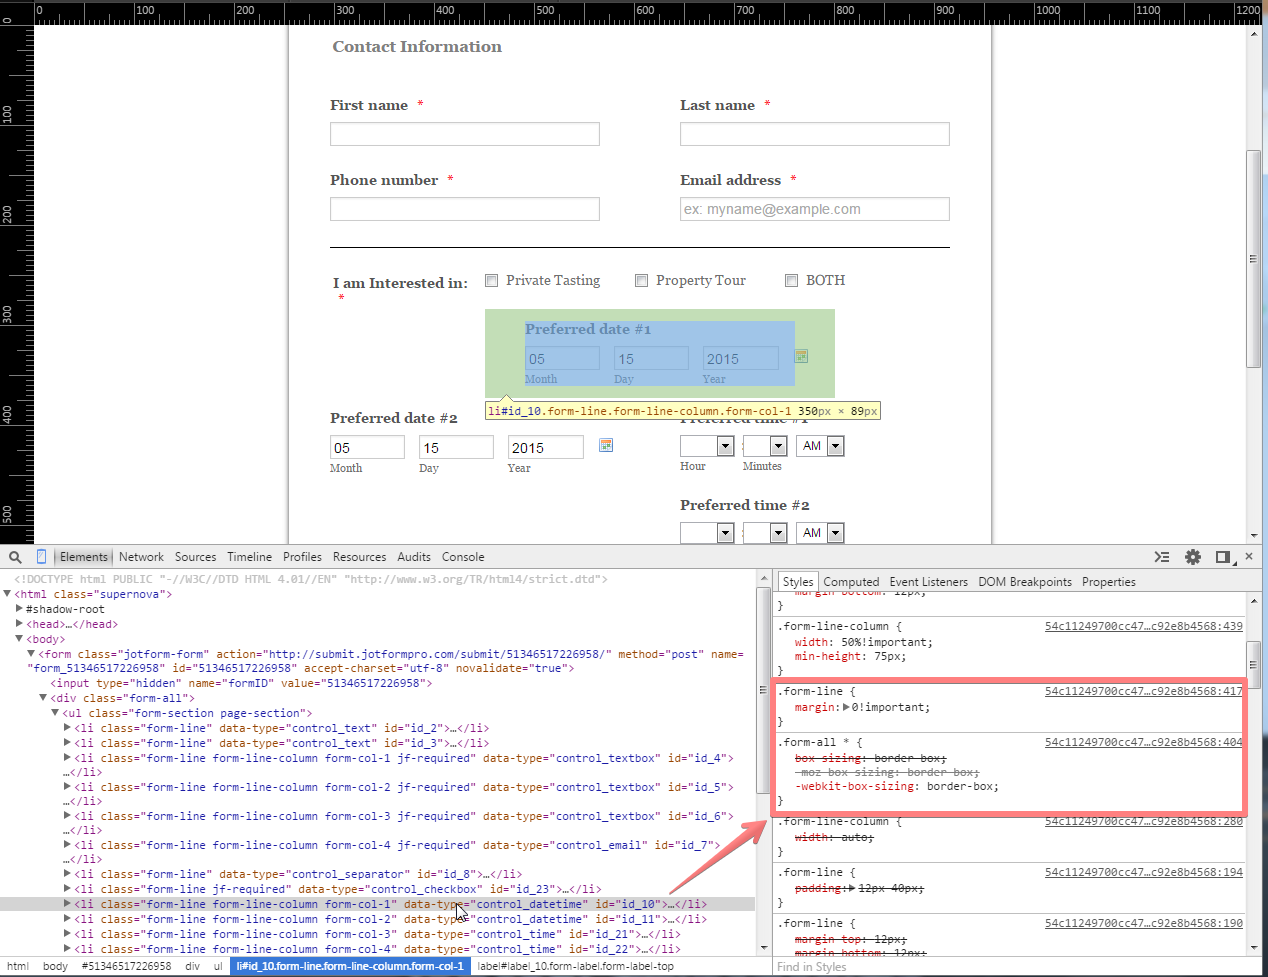 Form does not preview as it appears in editor Image 1 Screenshot 20